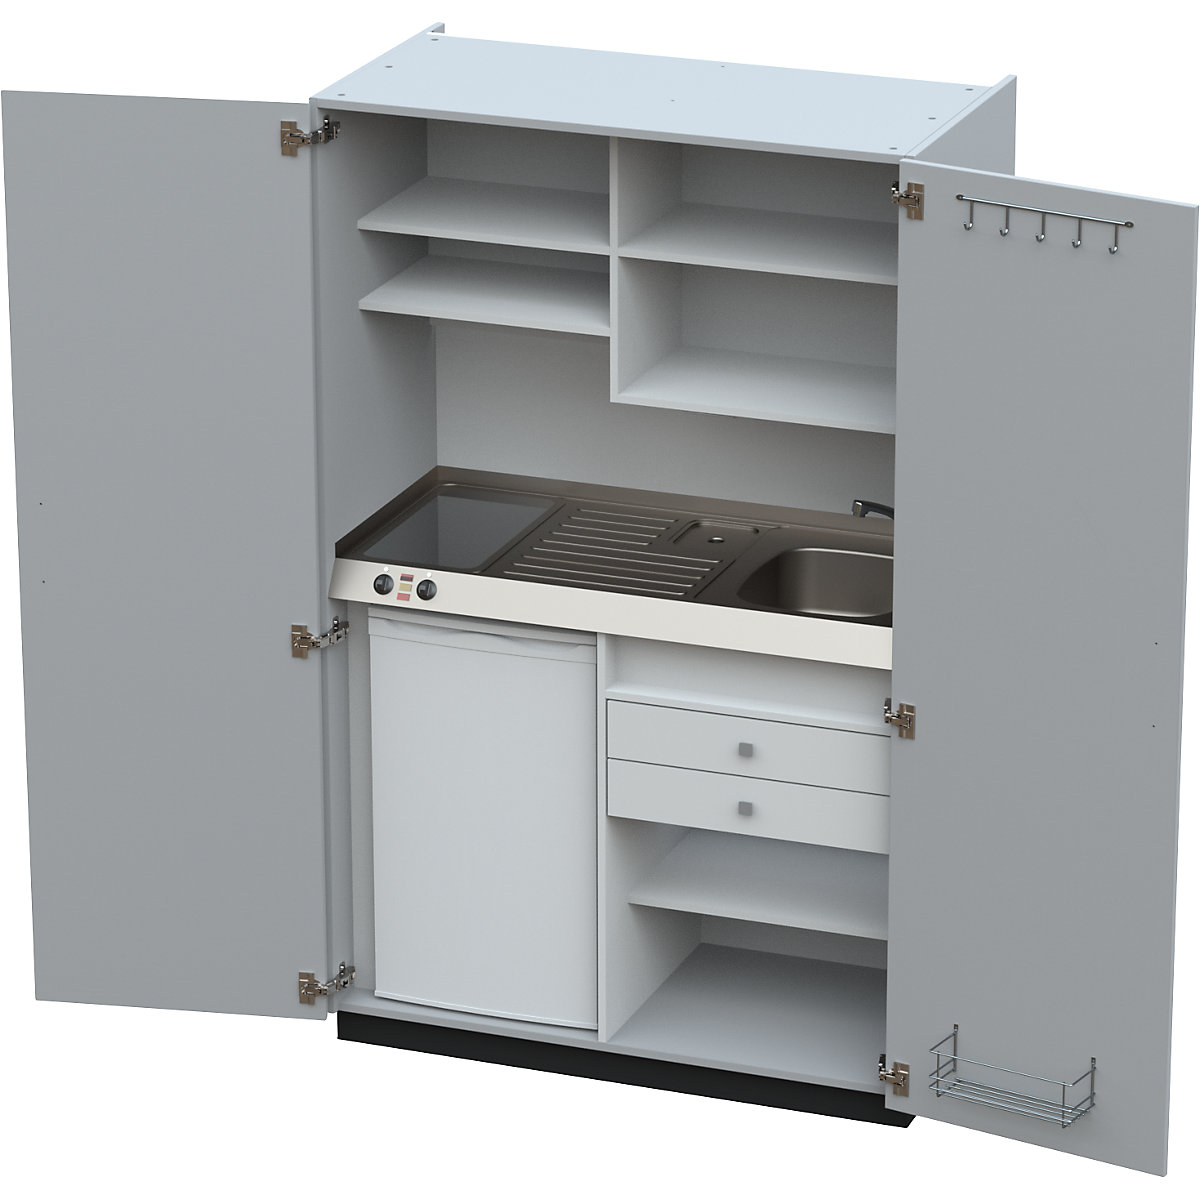 Kitchen unit with hinged doors, 2 glass ceramic hotplates, basin at right, grey, 1956 x 1200 x 650 mm-13